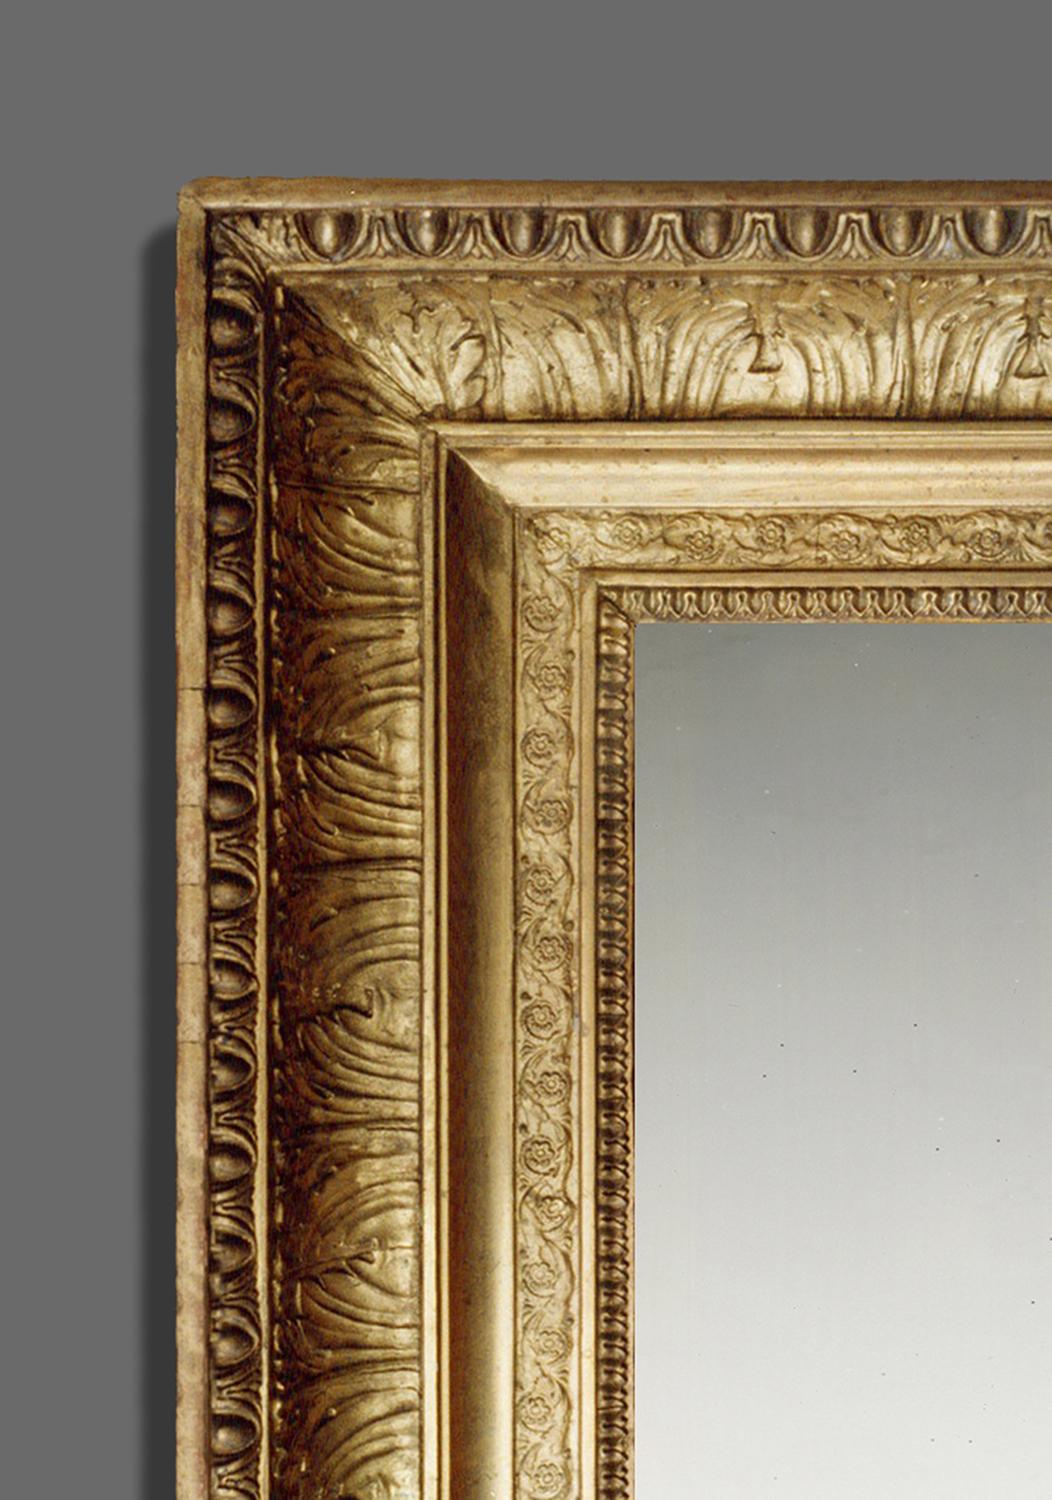 A luxurious and ornate 1st half 19th century French Empire frame. Its profile is concave with a cavetto and frieze, with the following ornament constructed in applied molded plaster of Paris: egg-&-dart, acanthus leaves, scrolling foliage,